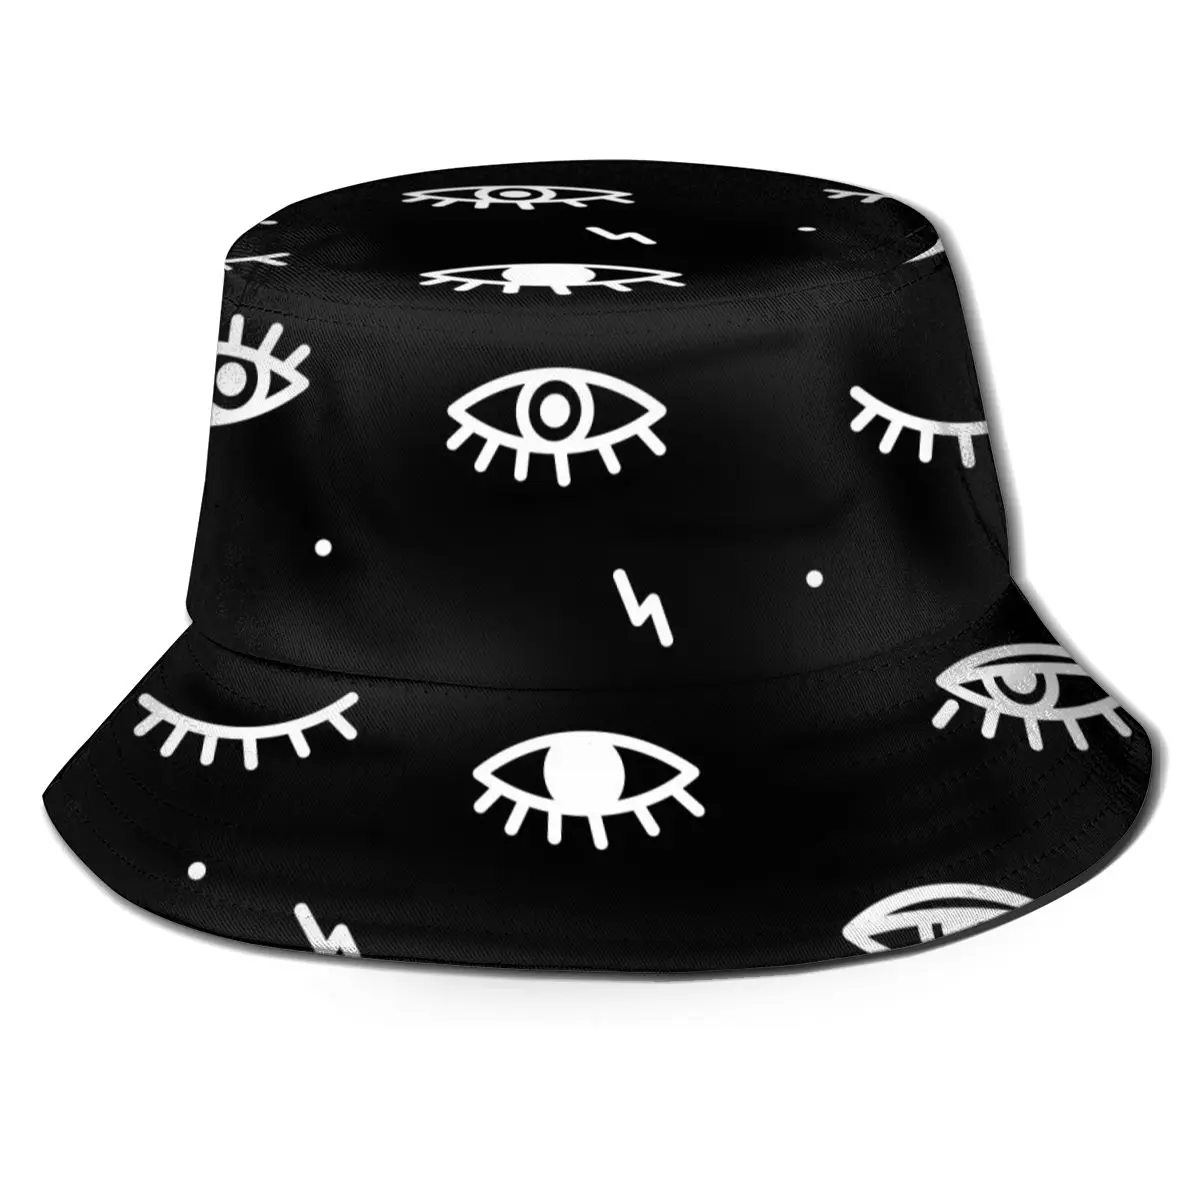 

CINESSD New Fashion Bucket Hats Fisherman Caps For Women Men Gorras Summer Psychedelic Eyes Black And White Print